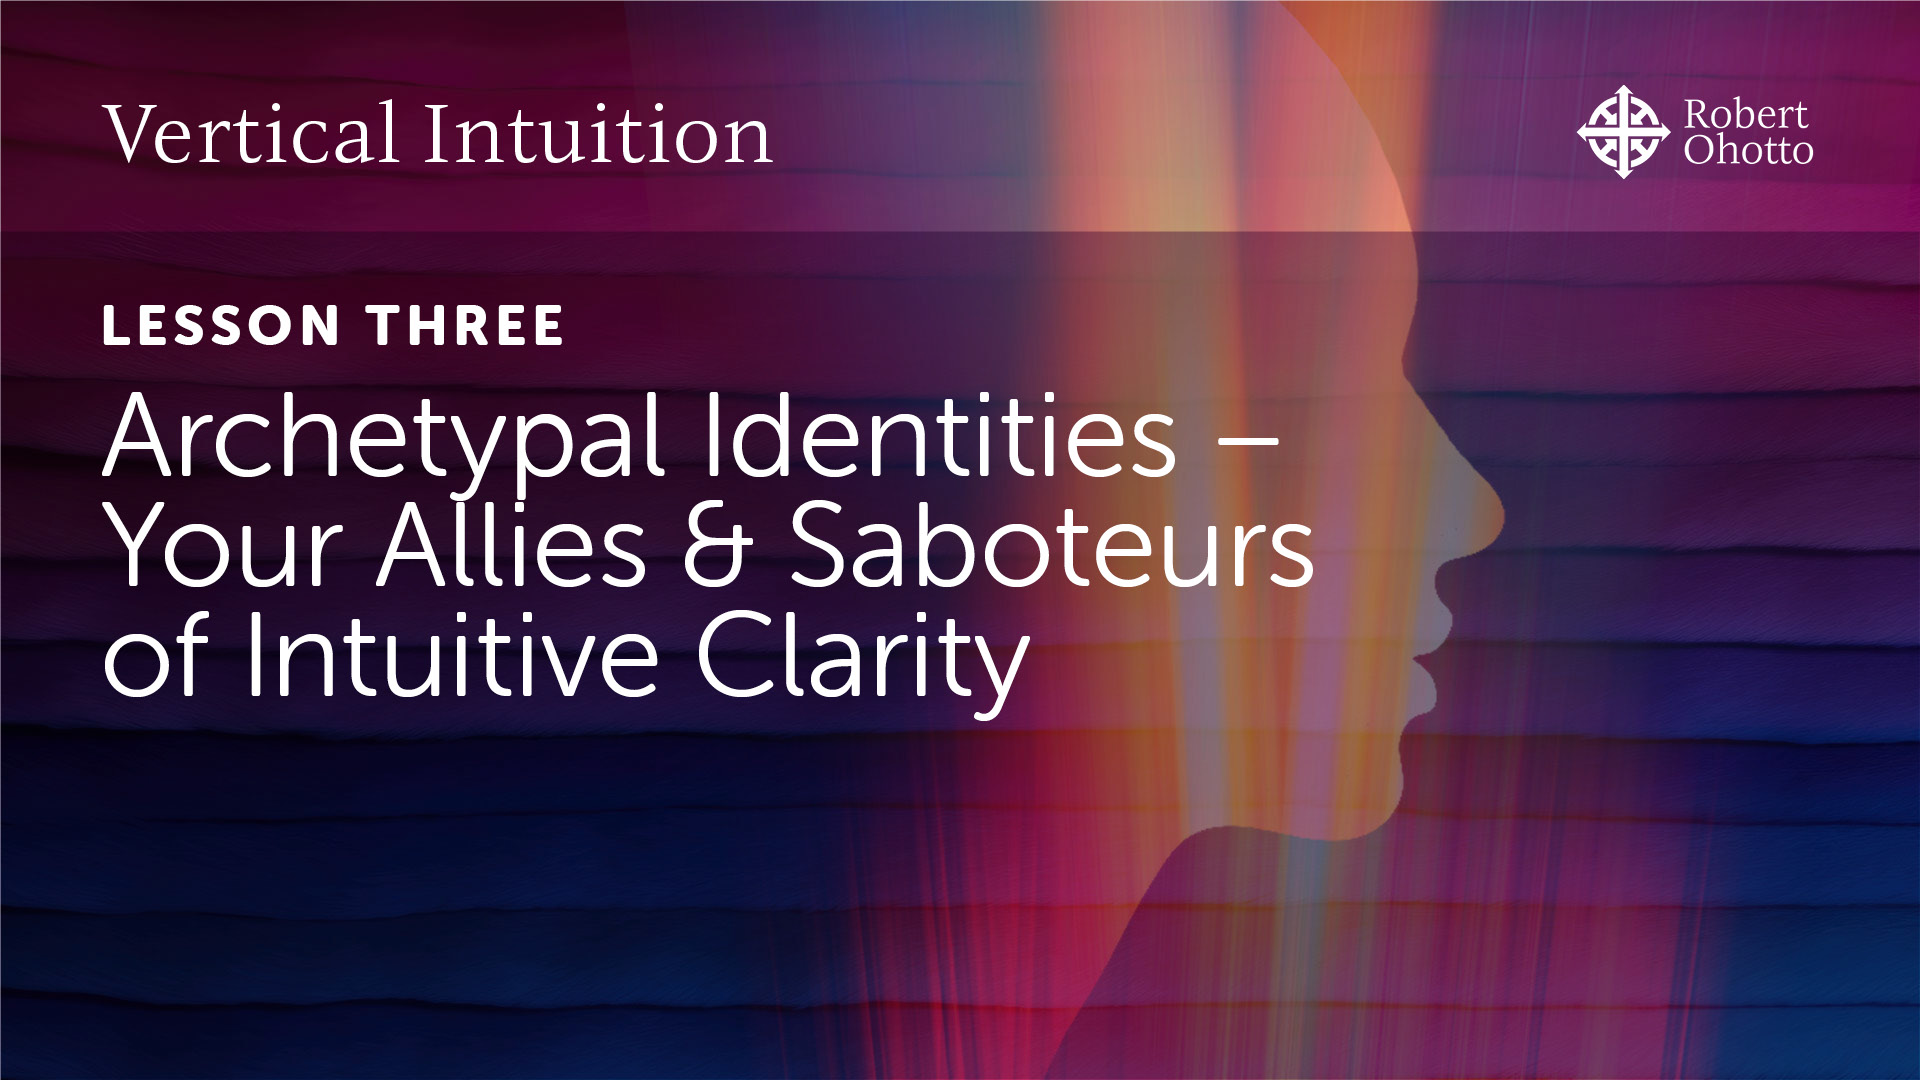 Lesson Three: Archetypal Identities – Your Allies & Saboteurs of Intuitive Clarity